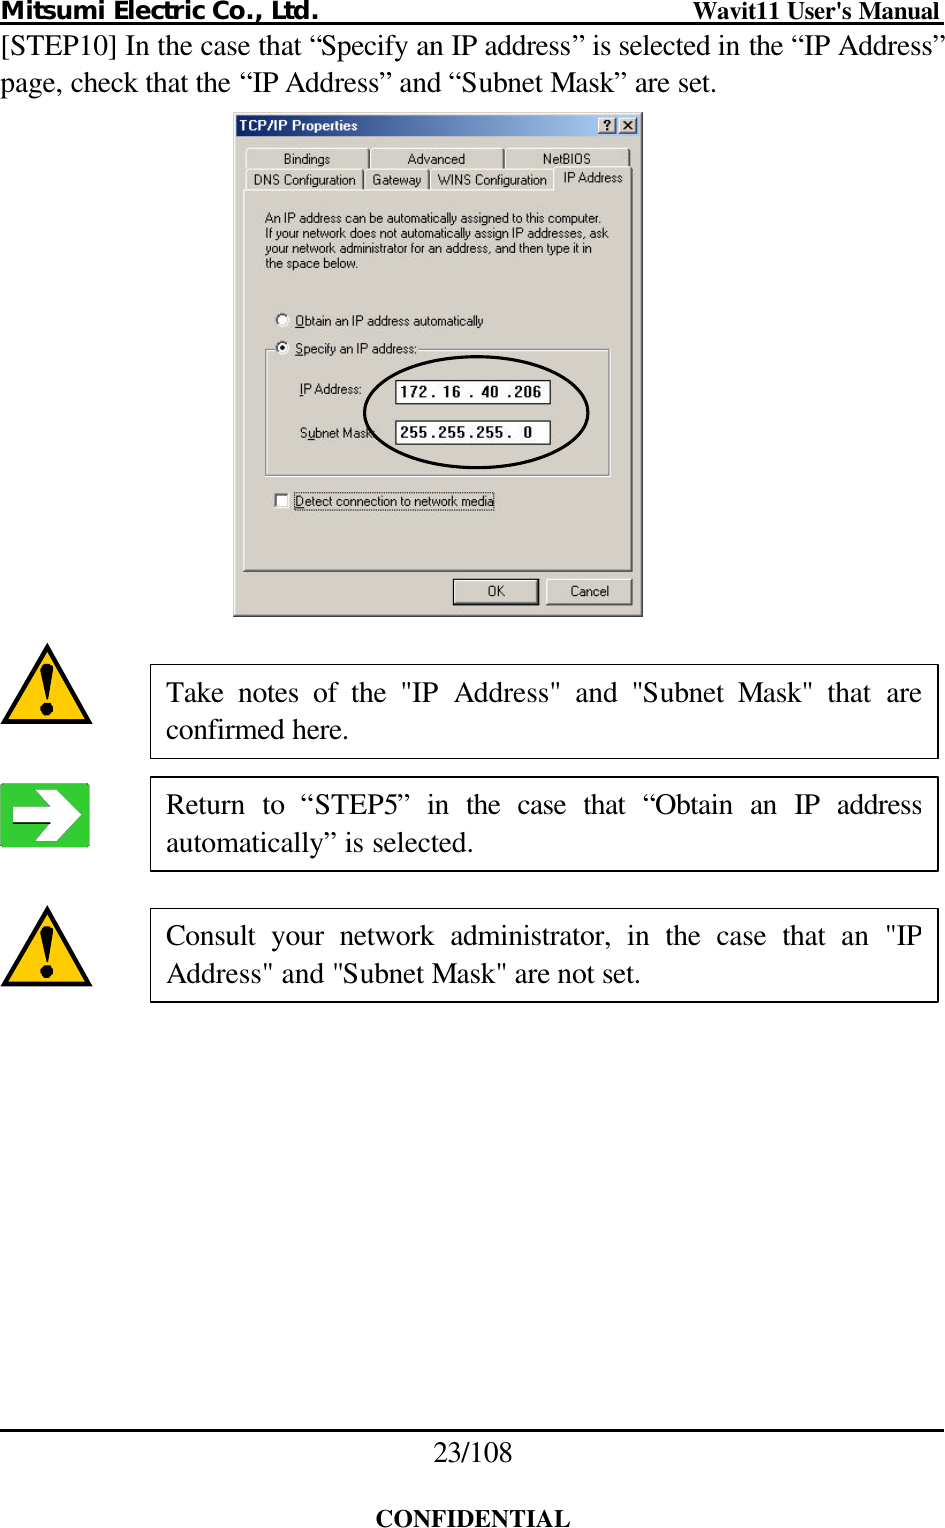 Mitsumi Electric Co., Ltd.                              Wavit11 User&apos;s Manual 23/108  CONFIDENTIAL [STEP10] In the case that “Specify an IP address” is selected in the “IP Address” page, check that the “IP Address” and “Subnet Mask” are set.         Consult your network administrator, in the case that an &quot;IP Address&quot; and &quot;Subnet Mask&quot; are not set. Return to “STEP5” in the case that  “Obtain an IP address automatically” is selected. Take notes of the &quot;IP  Address&quot;  and  &quot;Subnet  Mask&quot; that are confirmed here. 